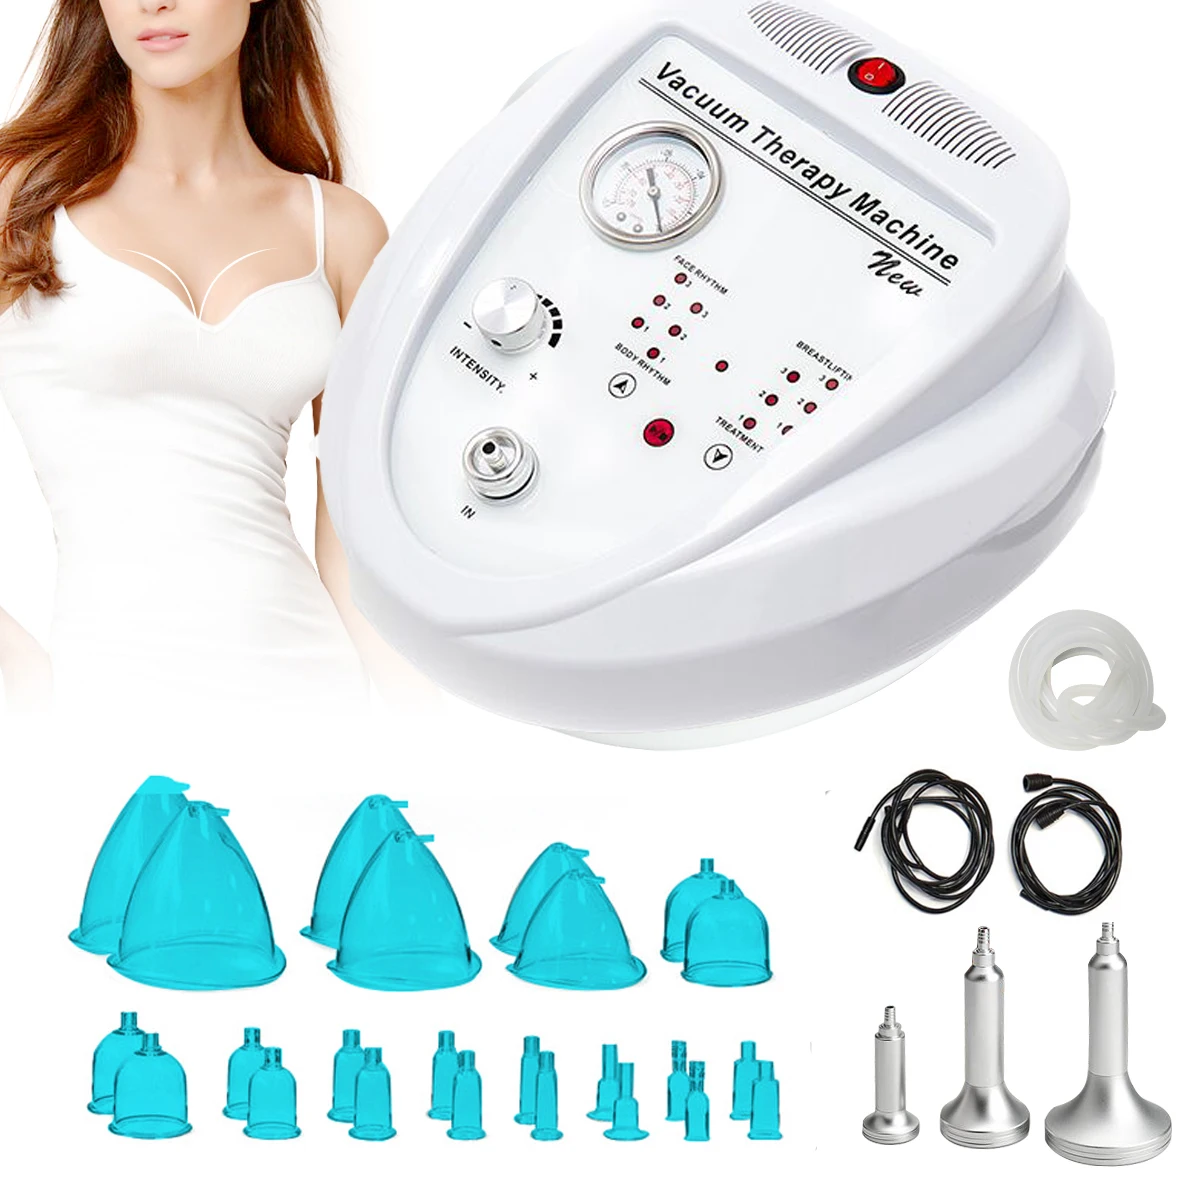 New 24 Blue Cups Vacuum Massage BBL Suction Cup Device Buttock Colombien Lifting Vacuum Therapy Breast Enlargement Machine